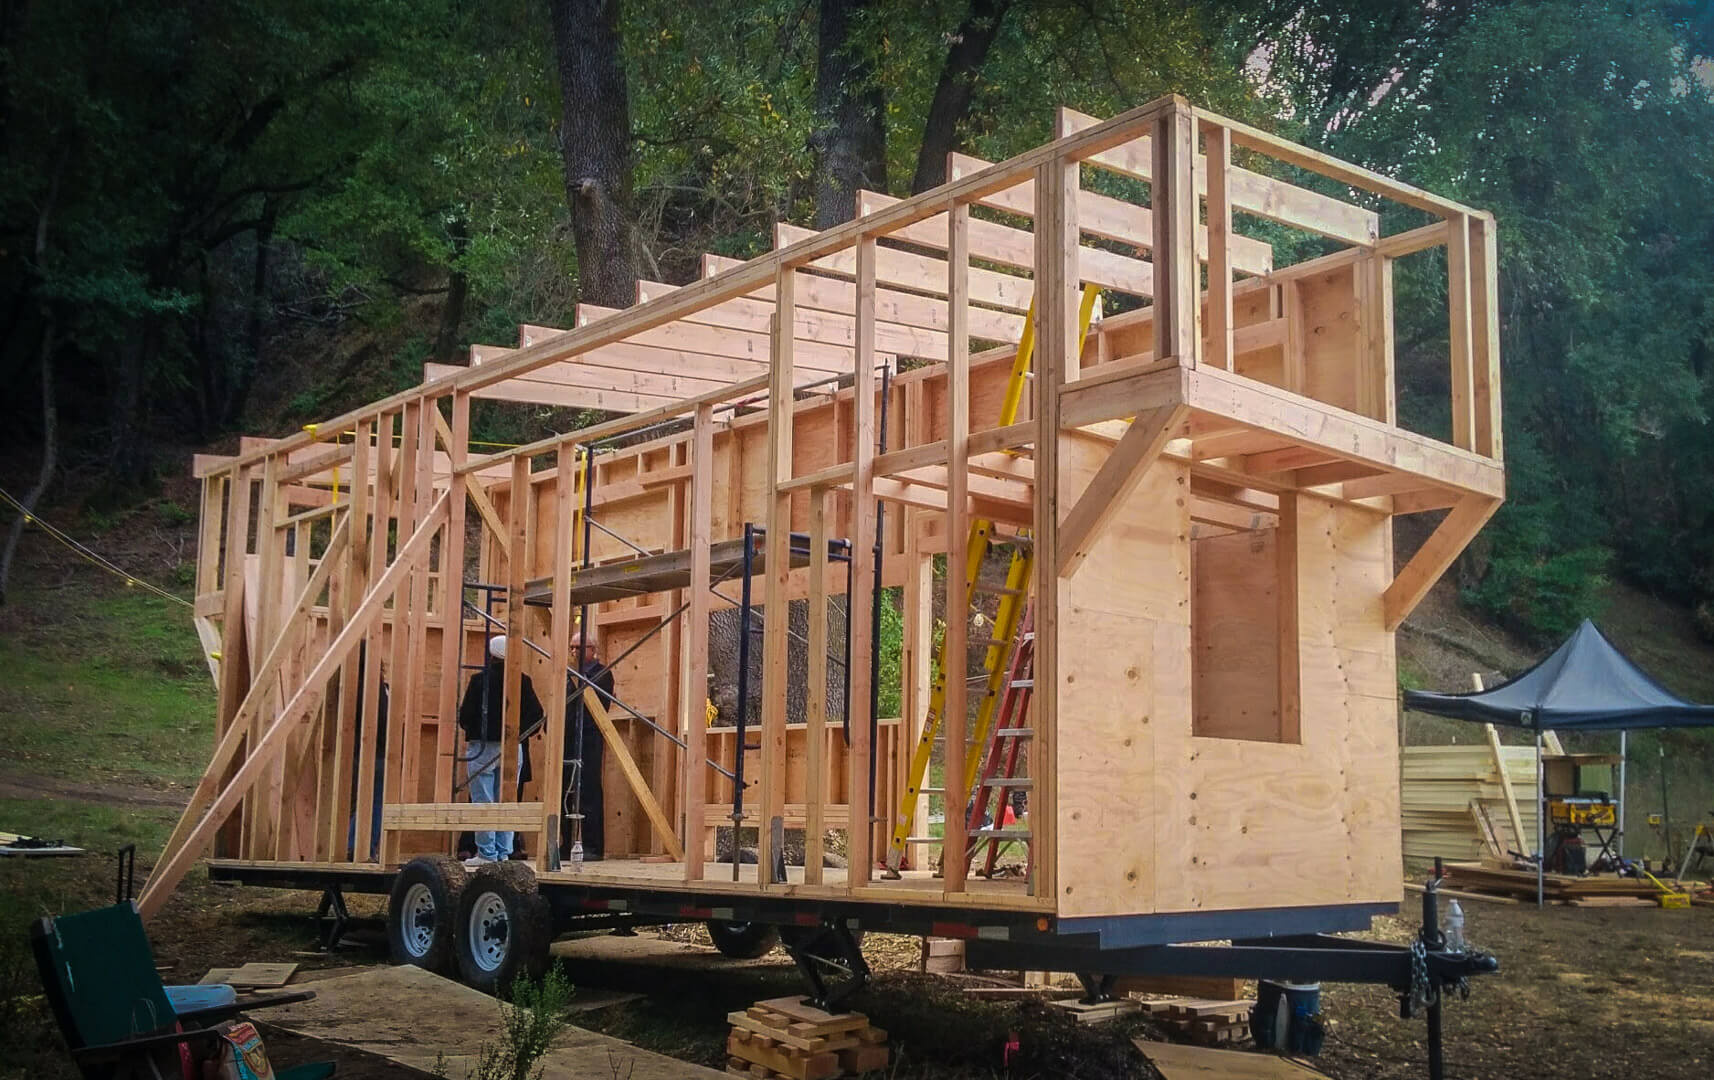 How To Build A Tiny House Not On Wheels - Best Design Idea